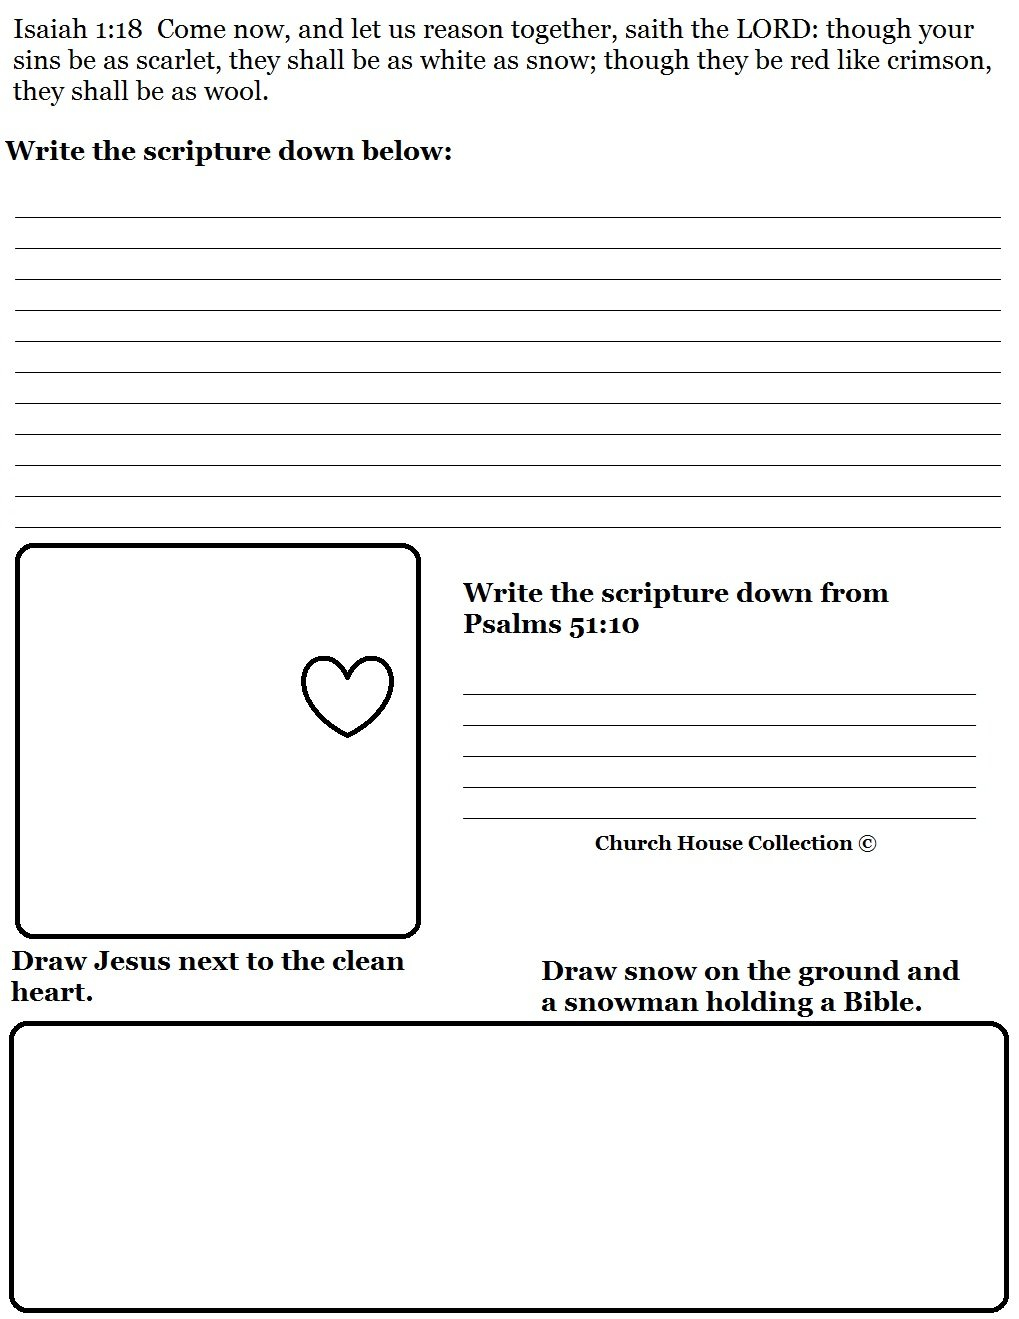 Snowman Sunday School Lesson And Free Sunday School Worksheets